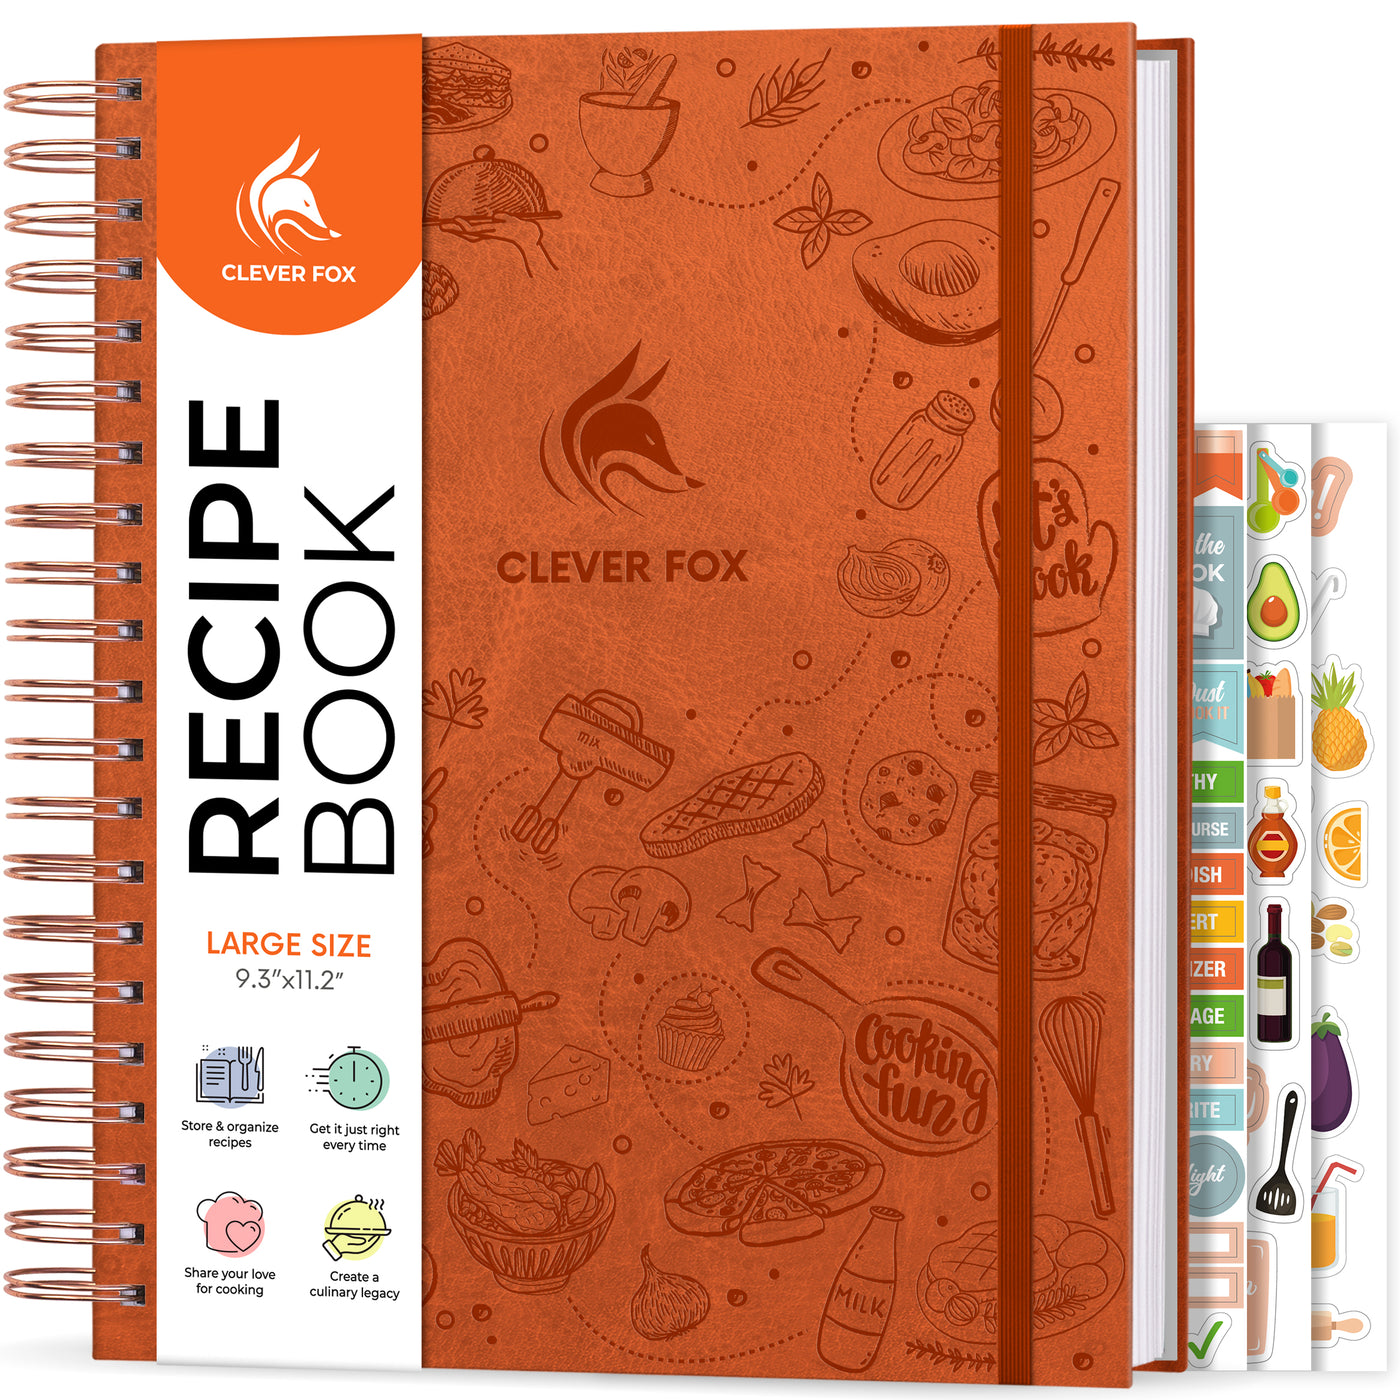  Clever Fox Recipe Book Spiral – Make Your Own Family